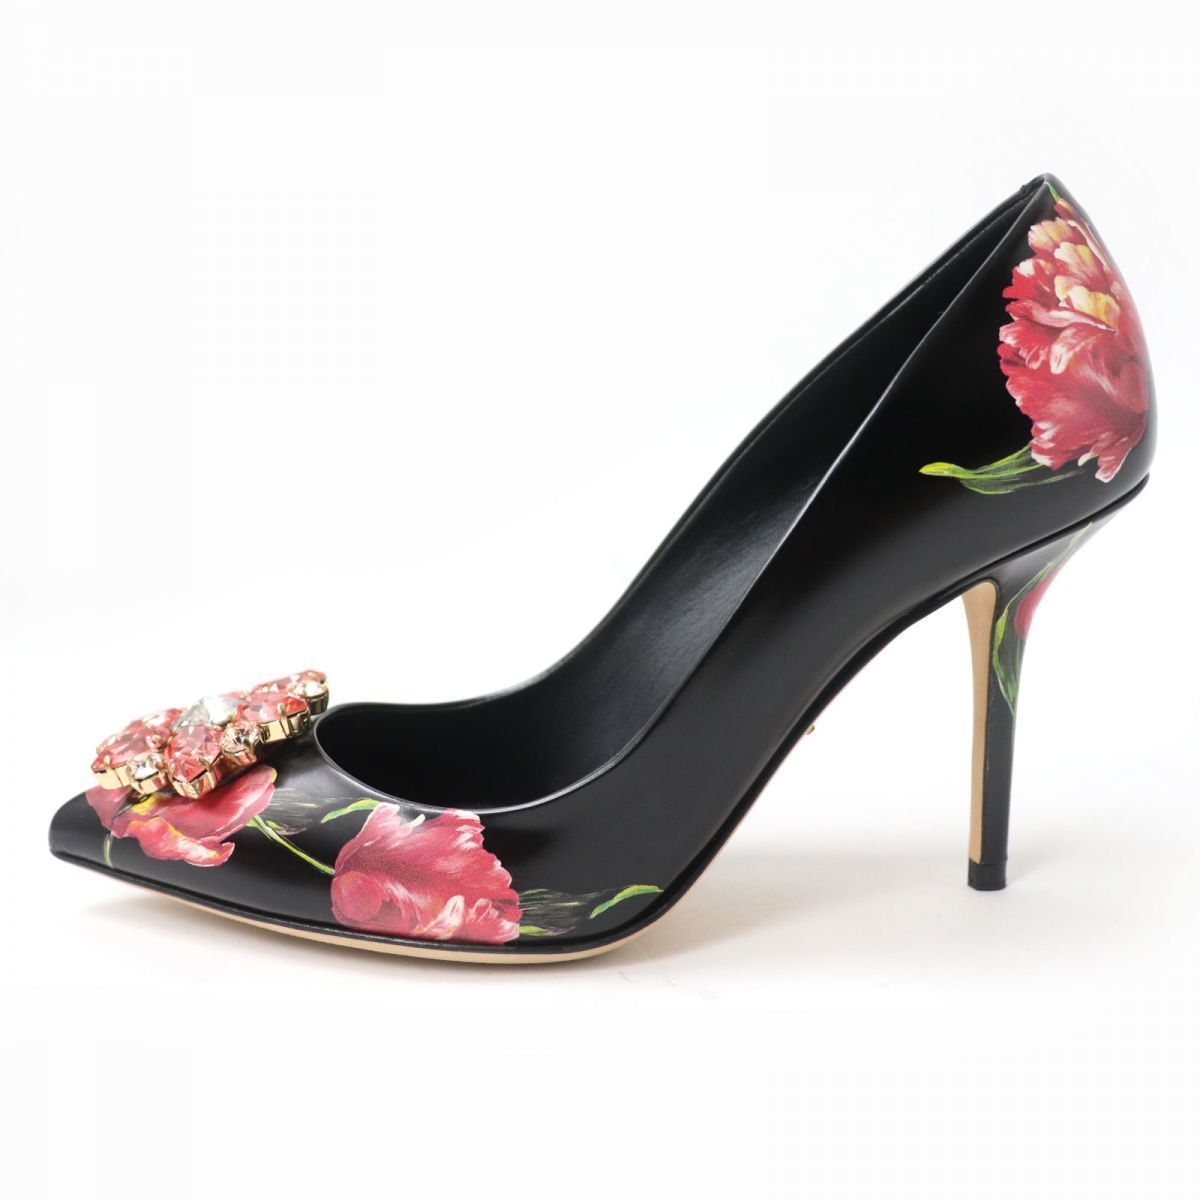  ultimate beautiful goods * Dolce & Gabbana crystal biju- attaching flower print leather pumps black × multicolor 38 1/2 made in Italy box attaching 